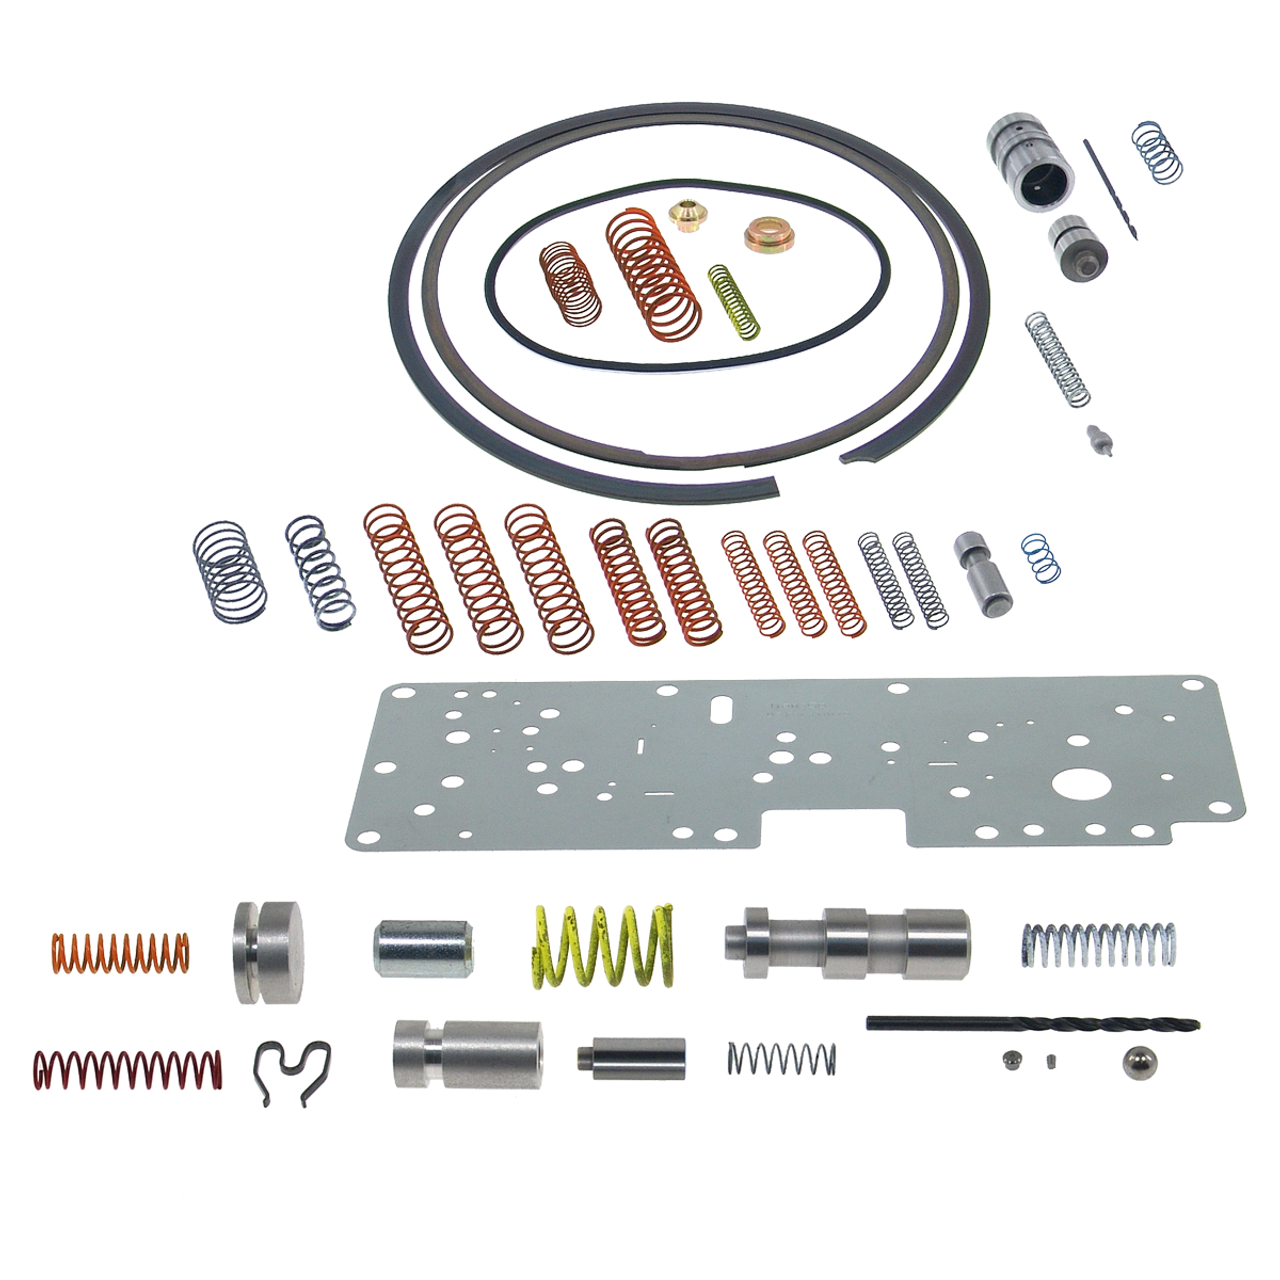 E4OD and 4R100 Ford Transmission HD Reprogramming Kit by TransGo.  Sold by Global Transmission Parts